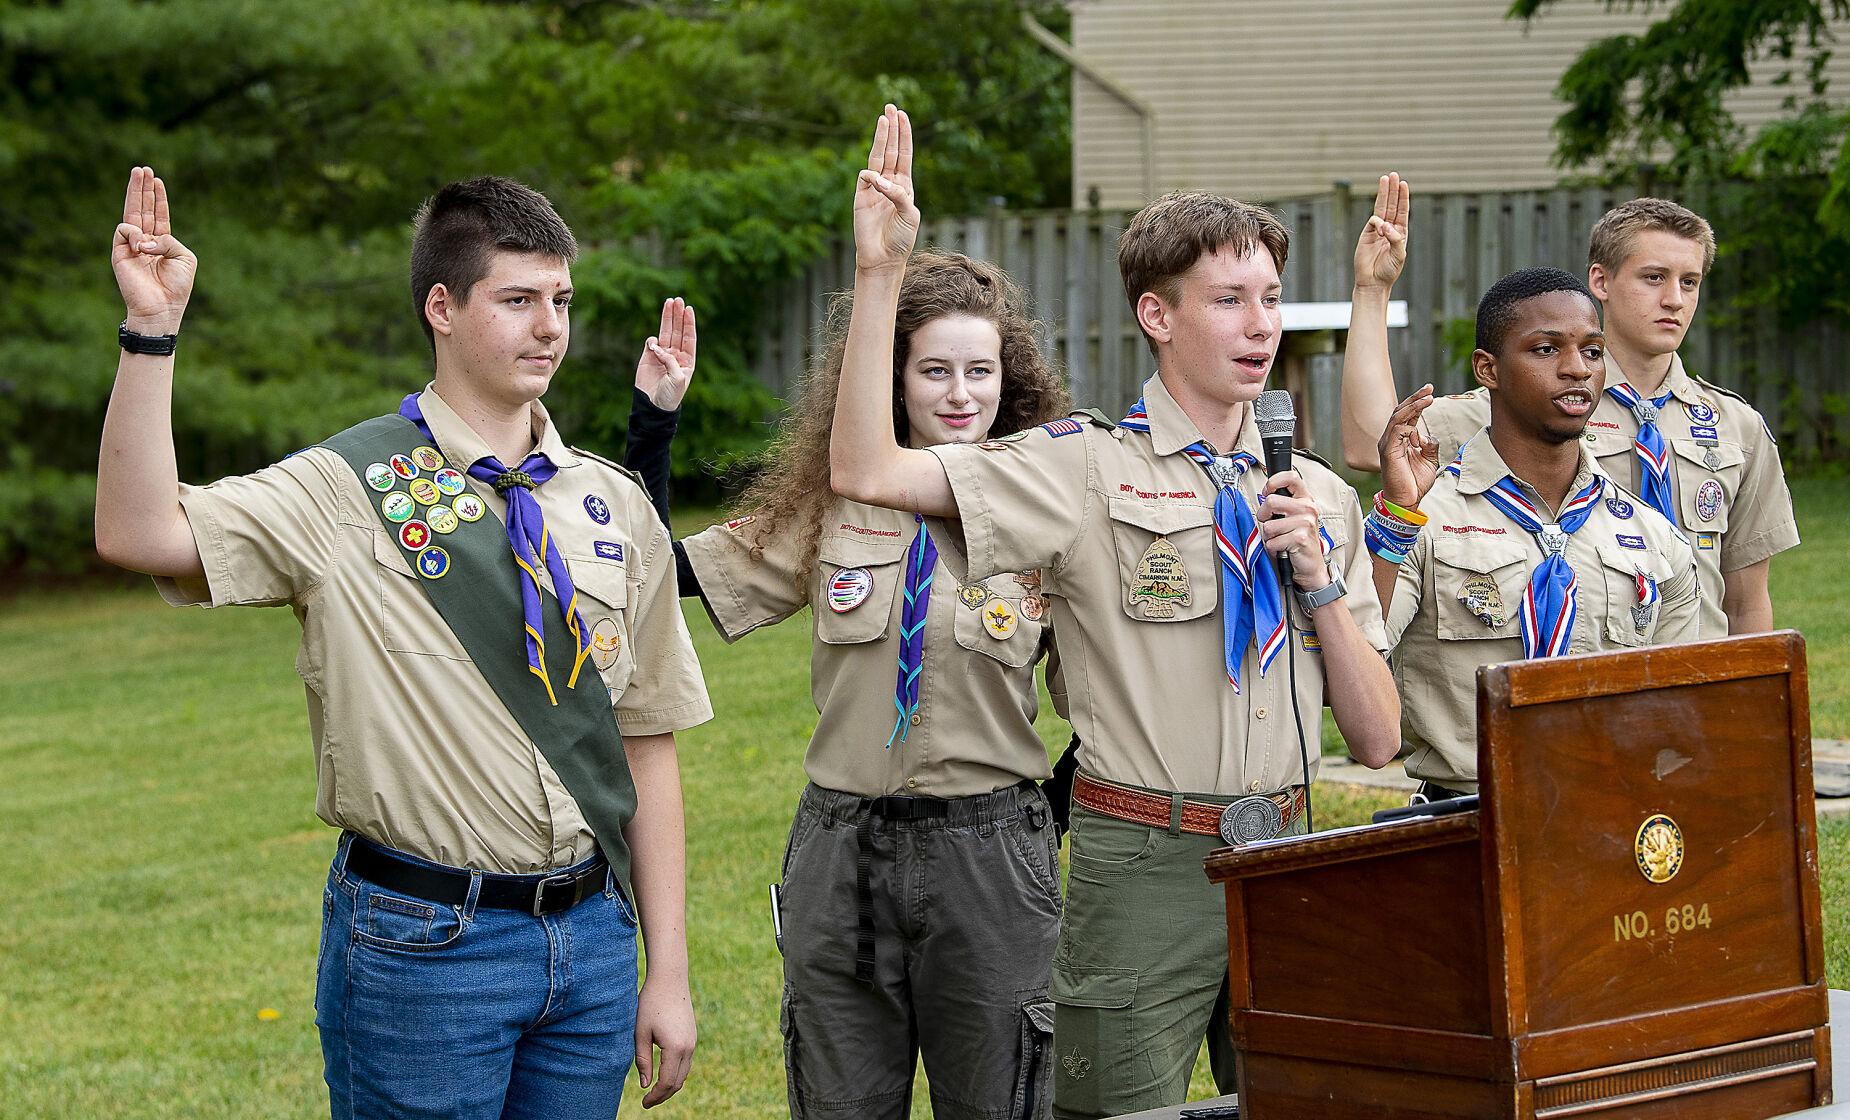 Local Boy Scout achieves historic feat - Florida NewsLine